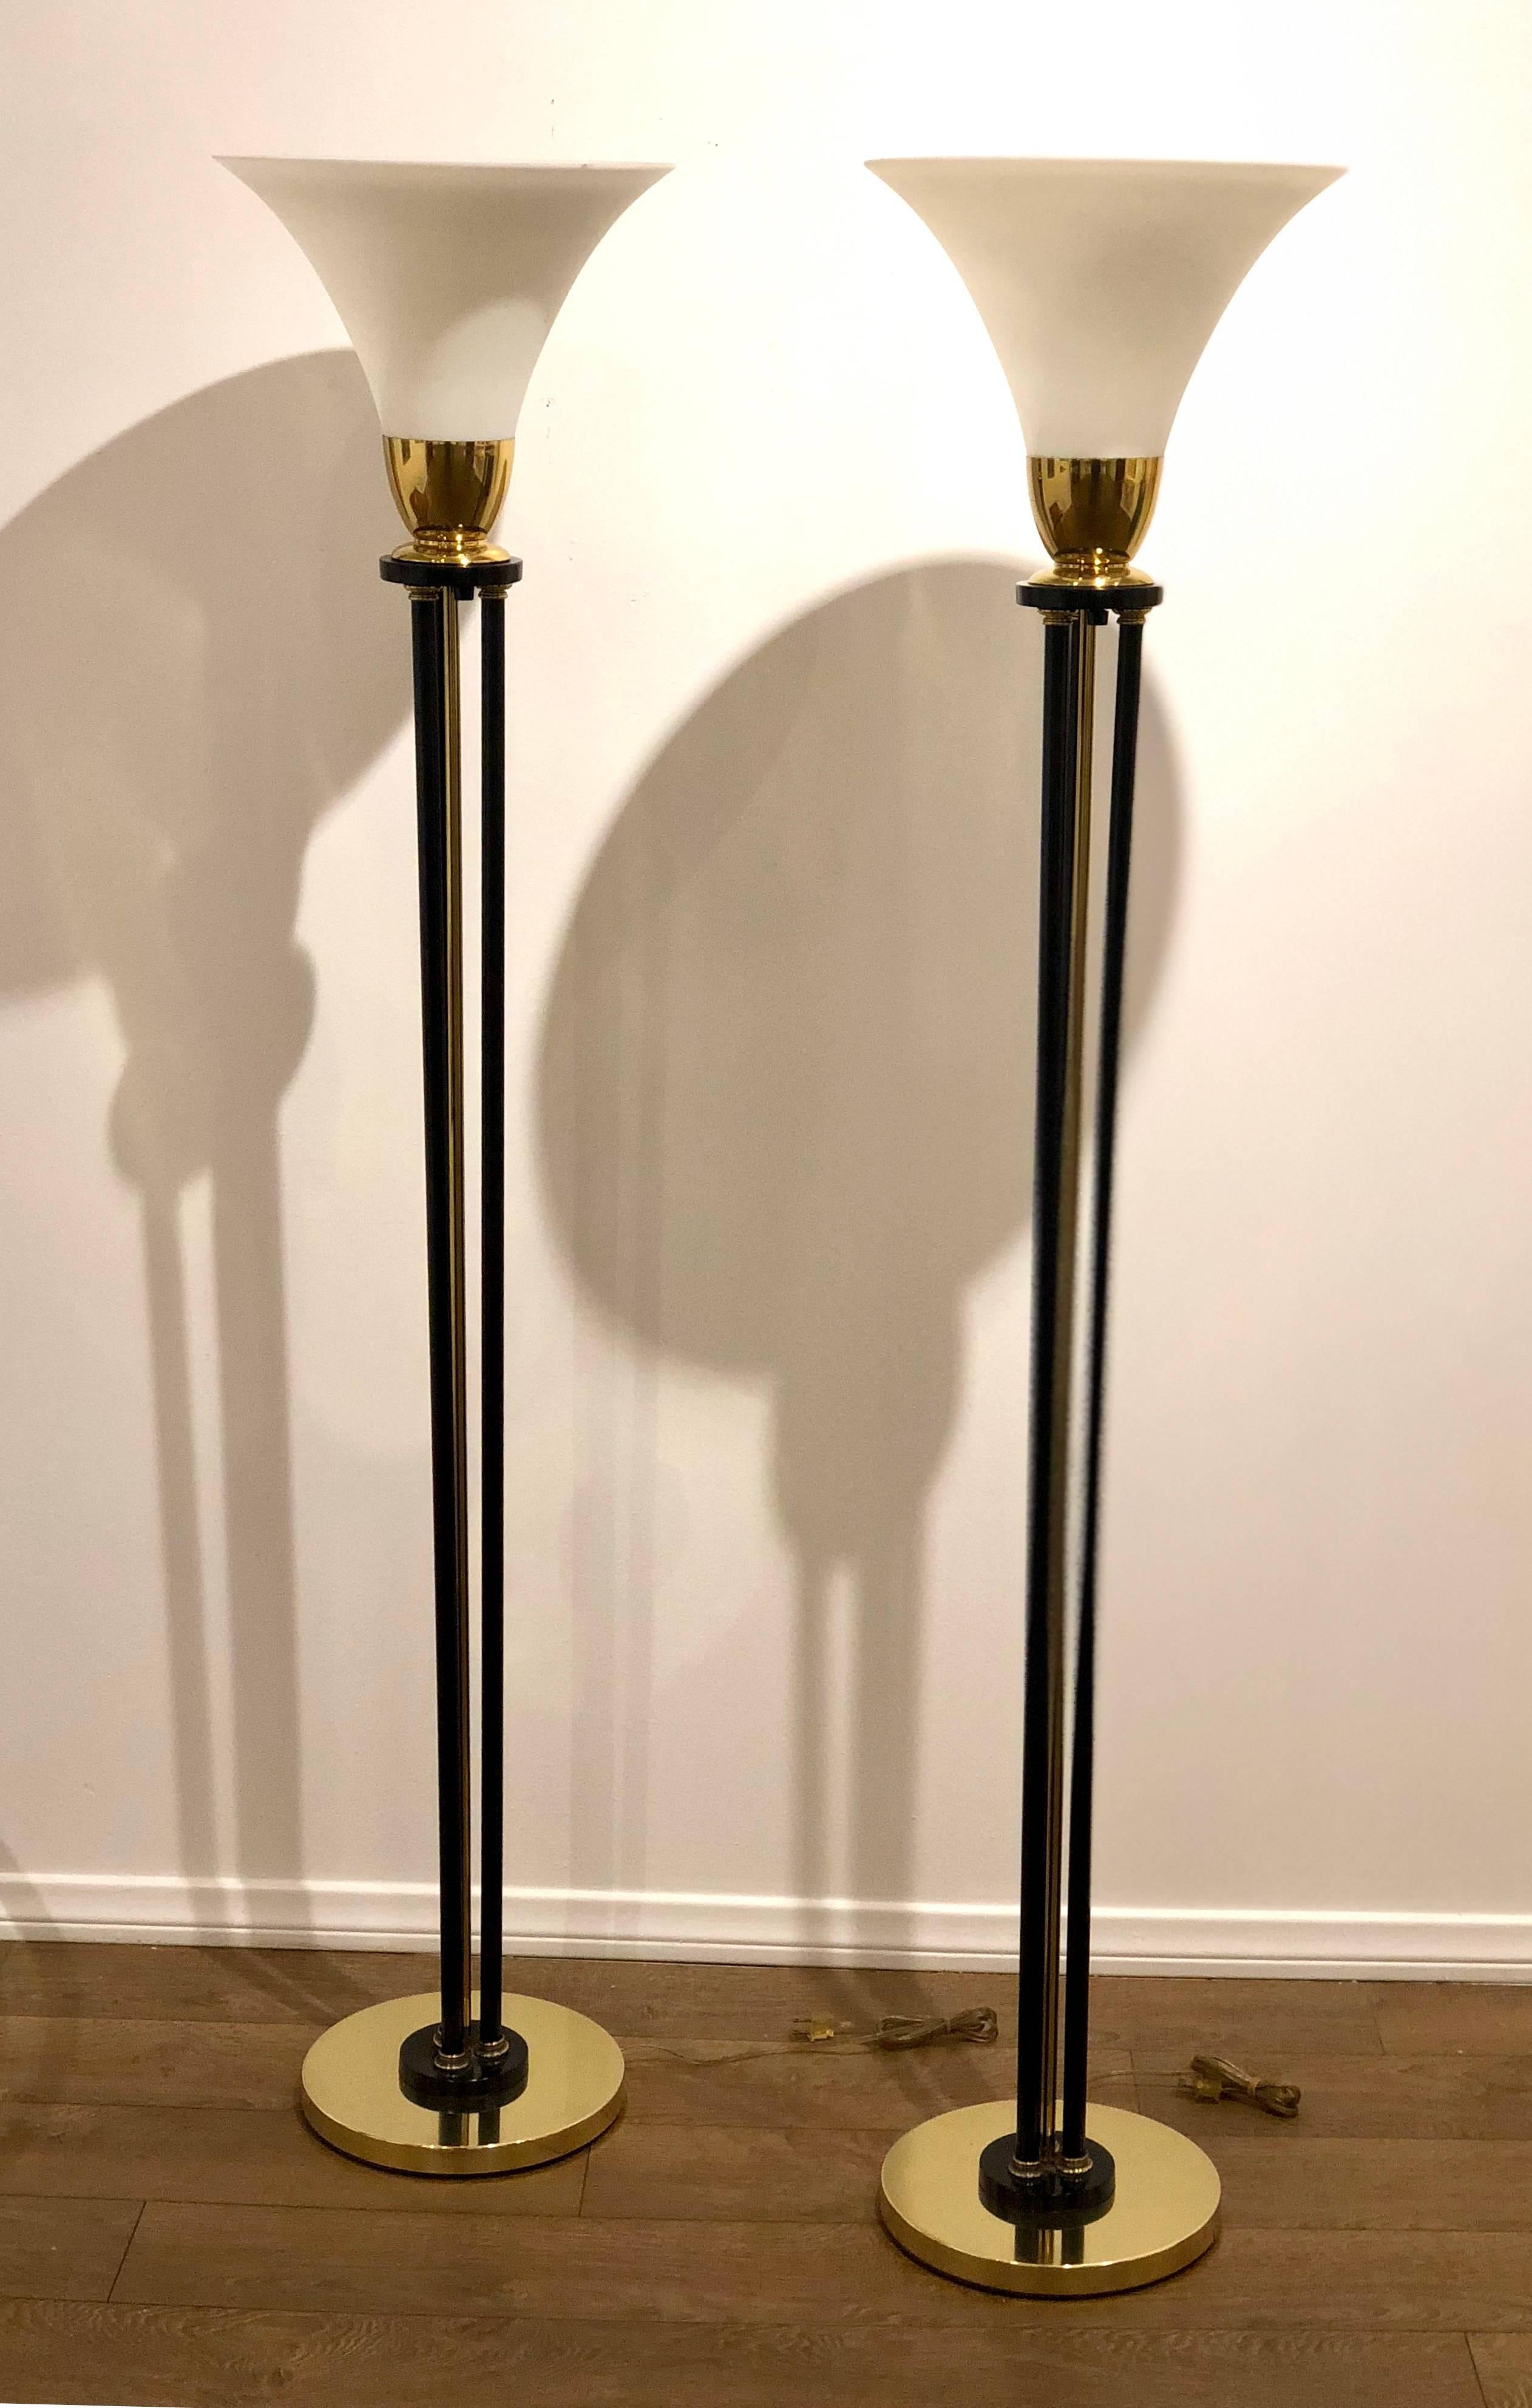 20th Century Pair of Art Deco Floor Lamps in Brass, Metal and Trumpet Glass Shape